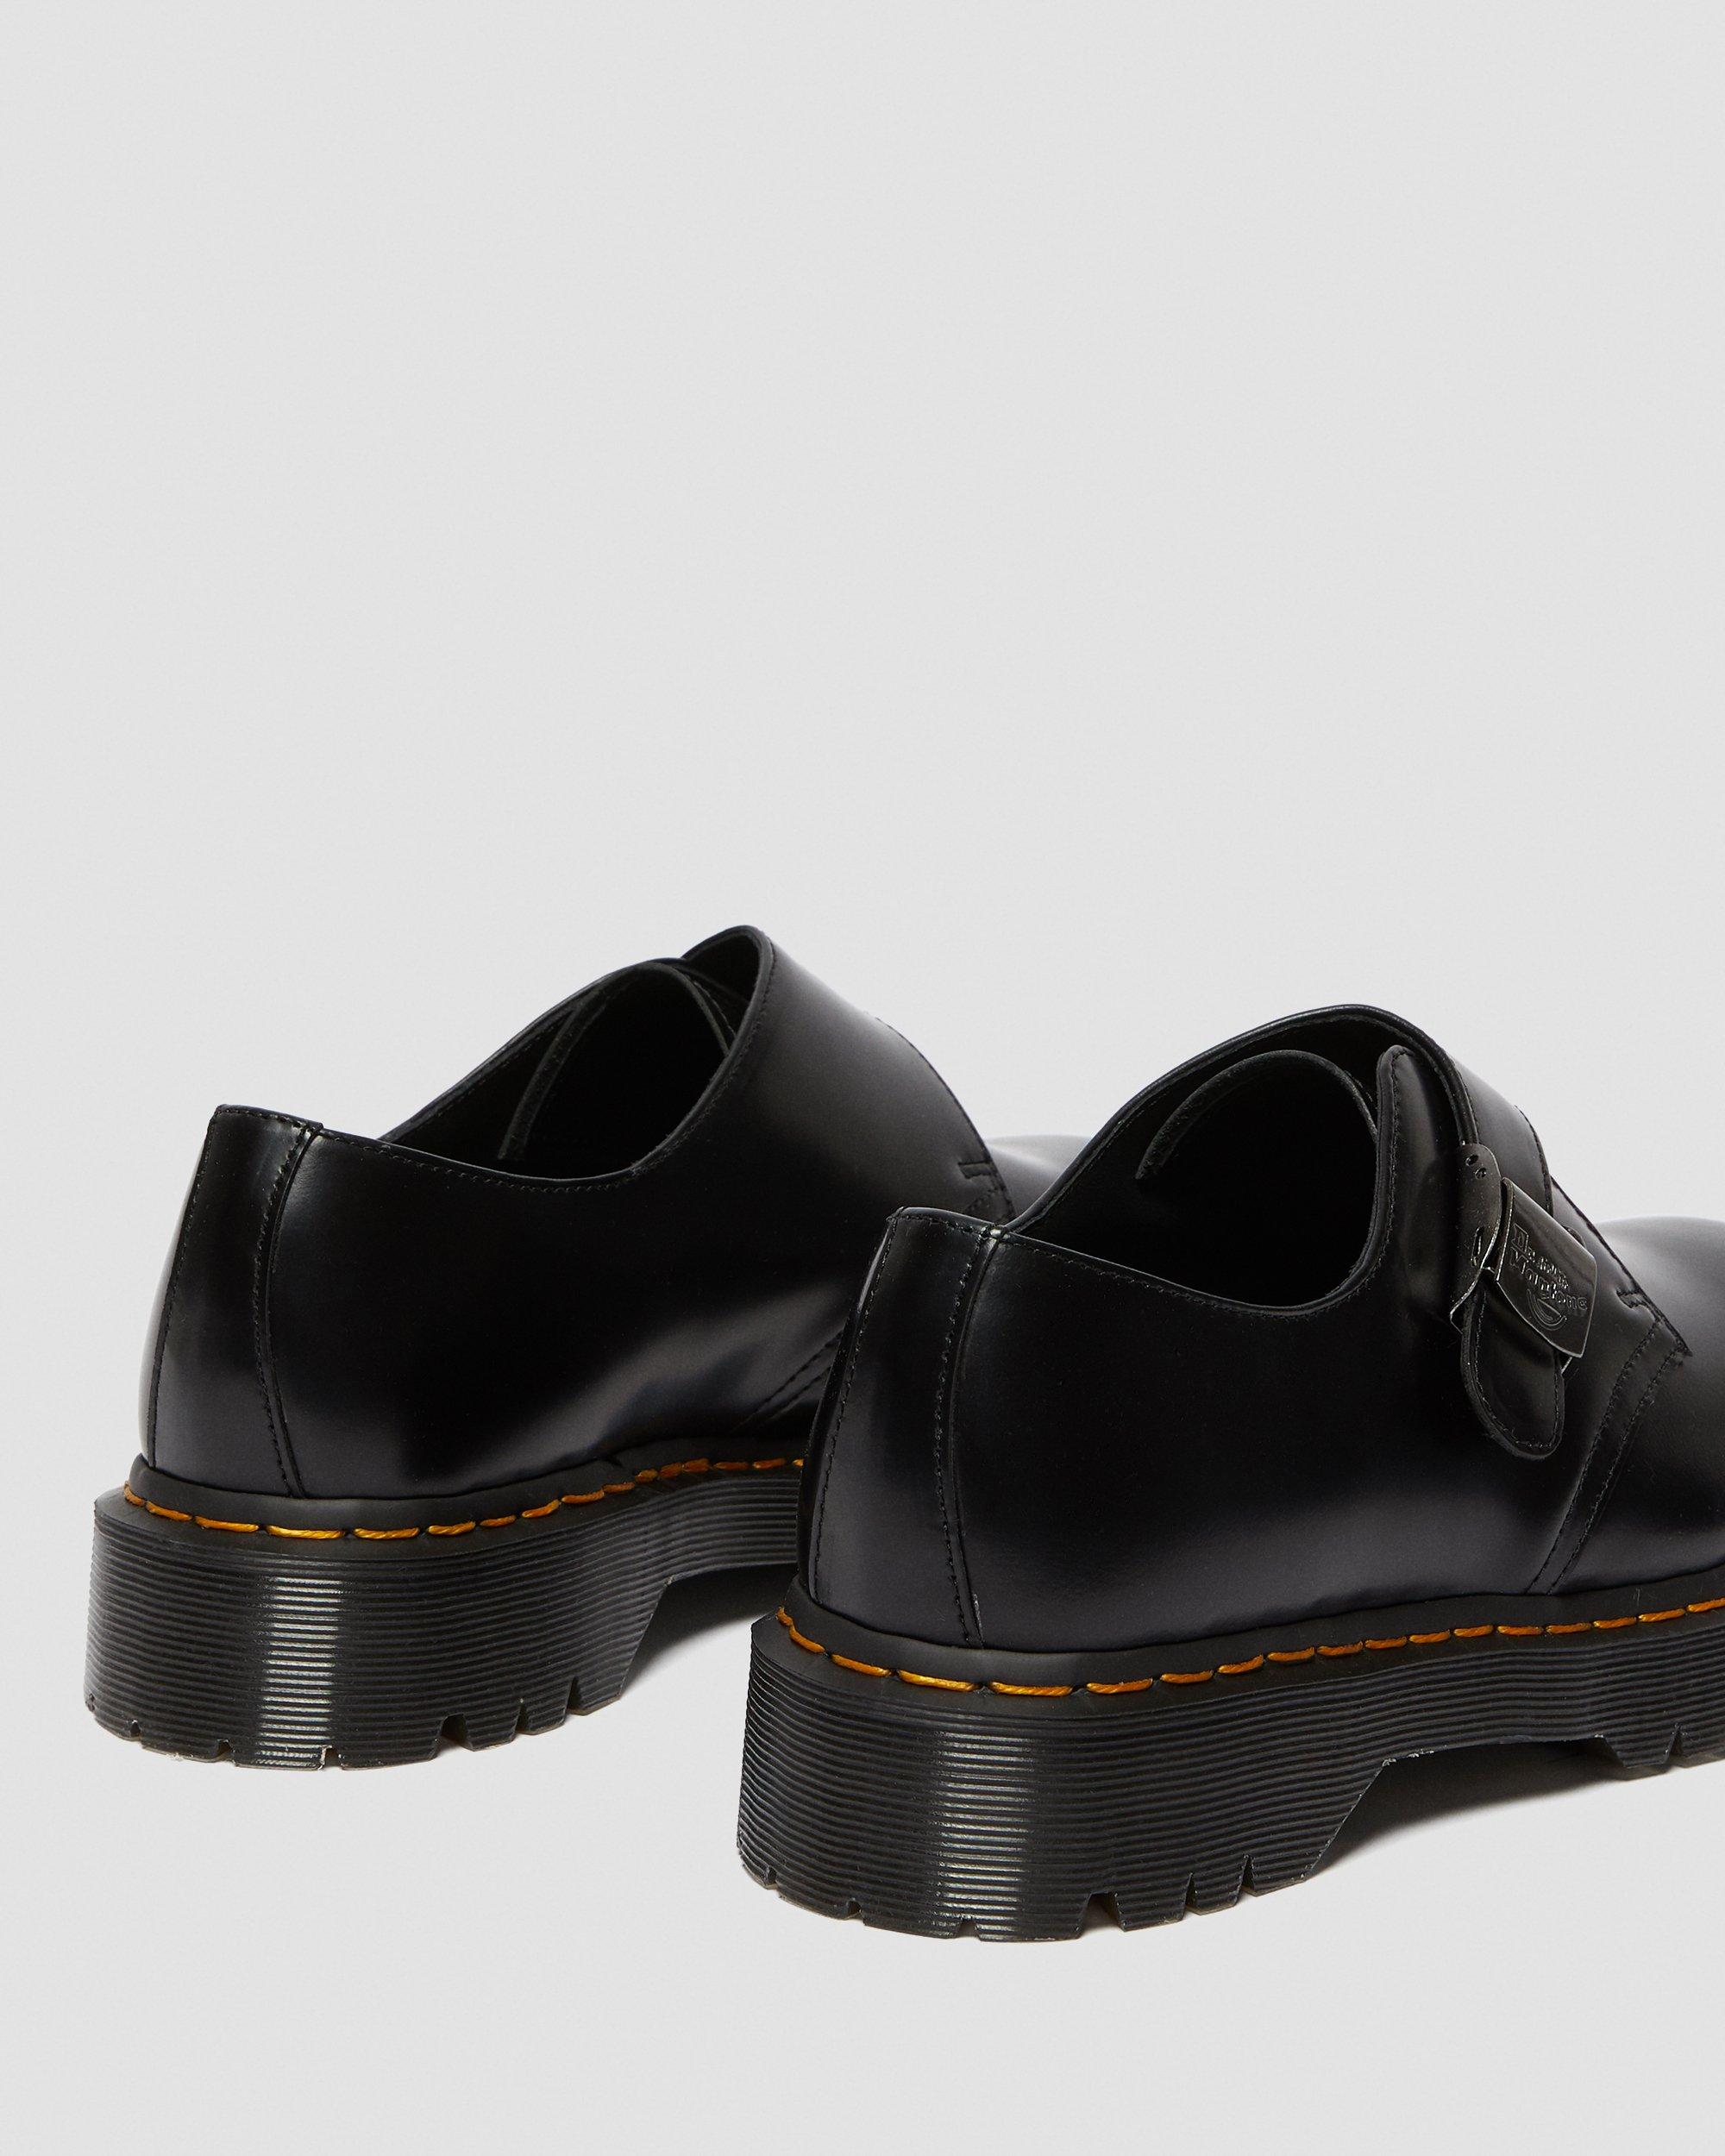 FENIMORE LOW LEATHER SHOES | Dr. Martens